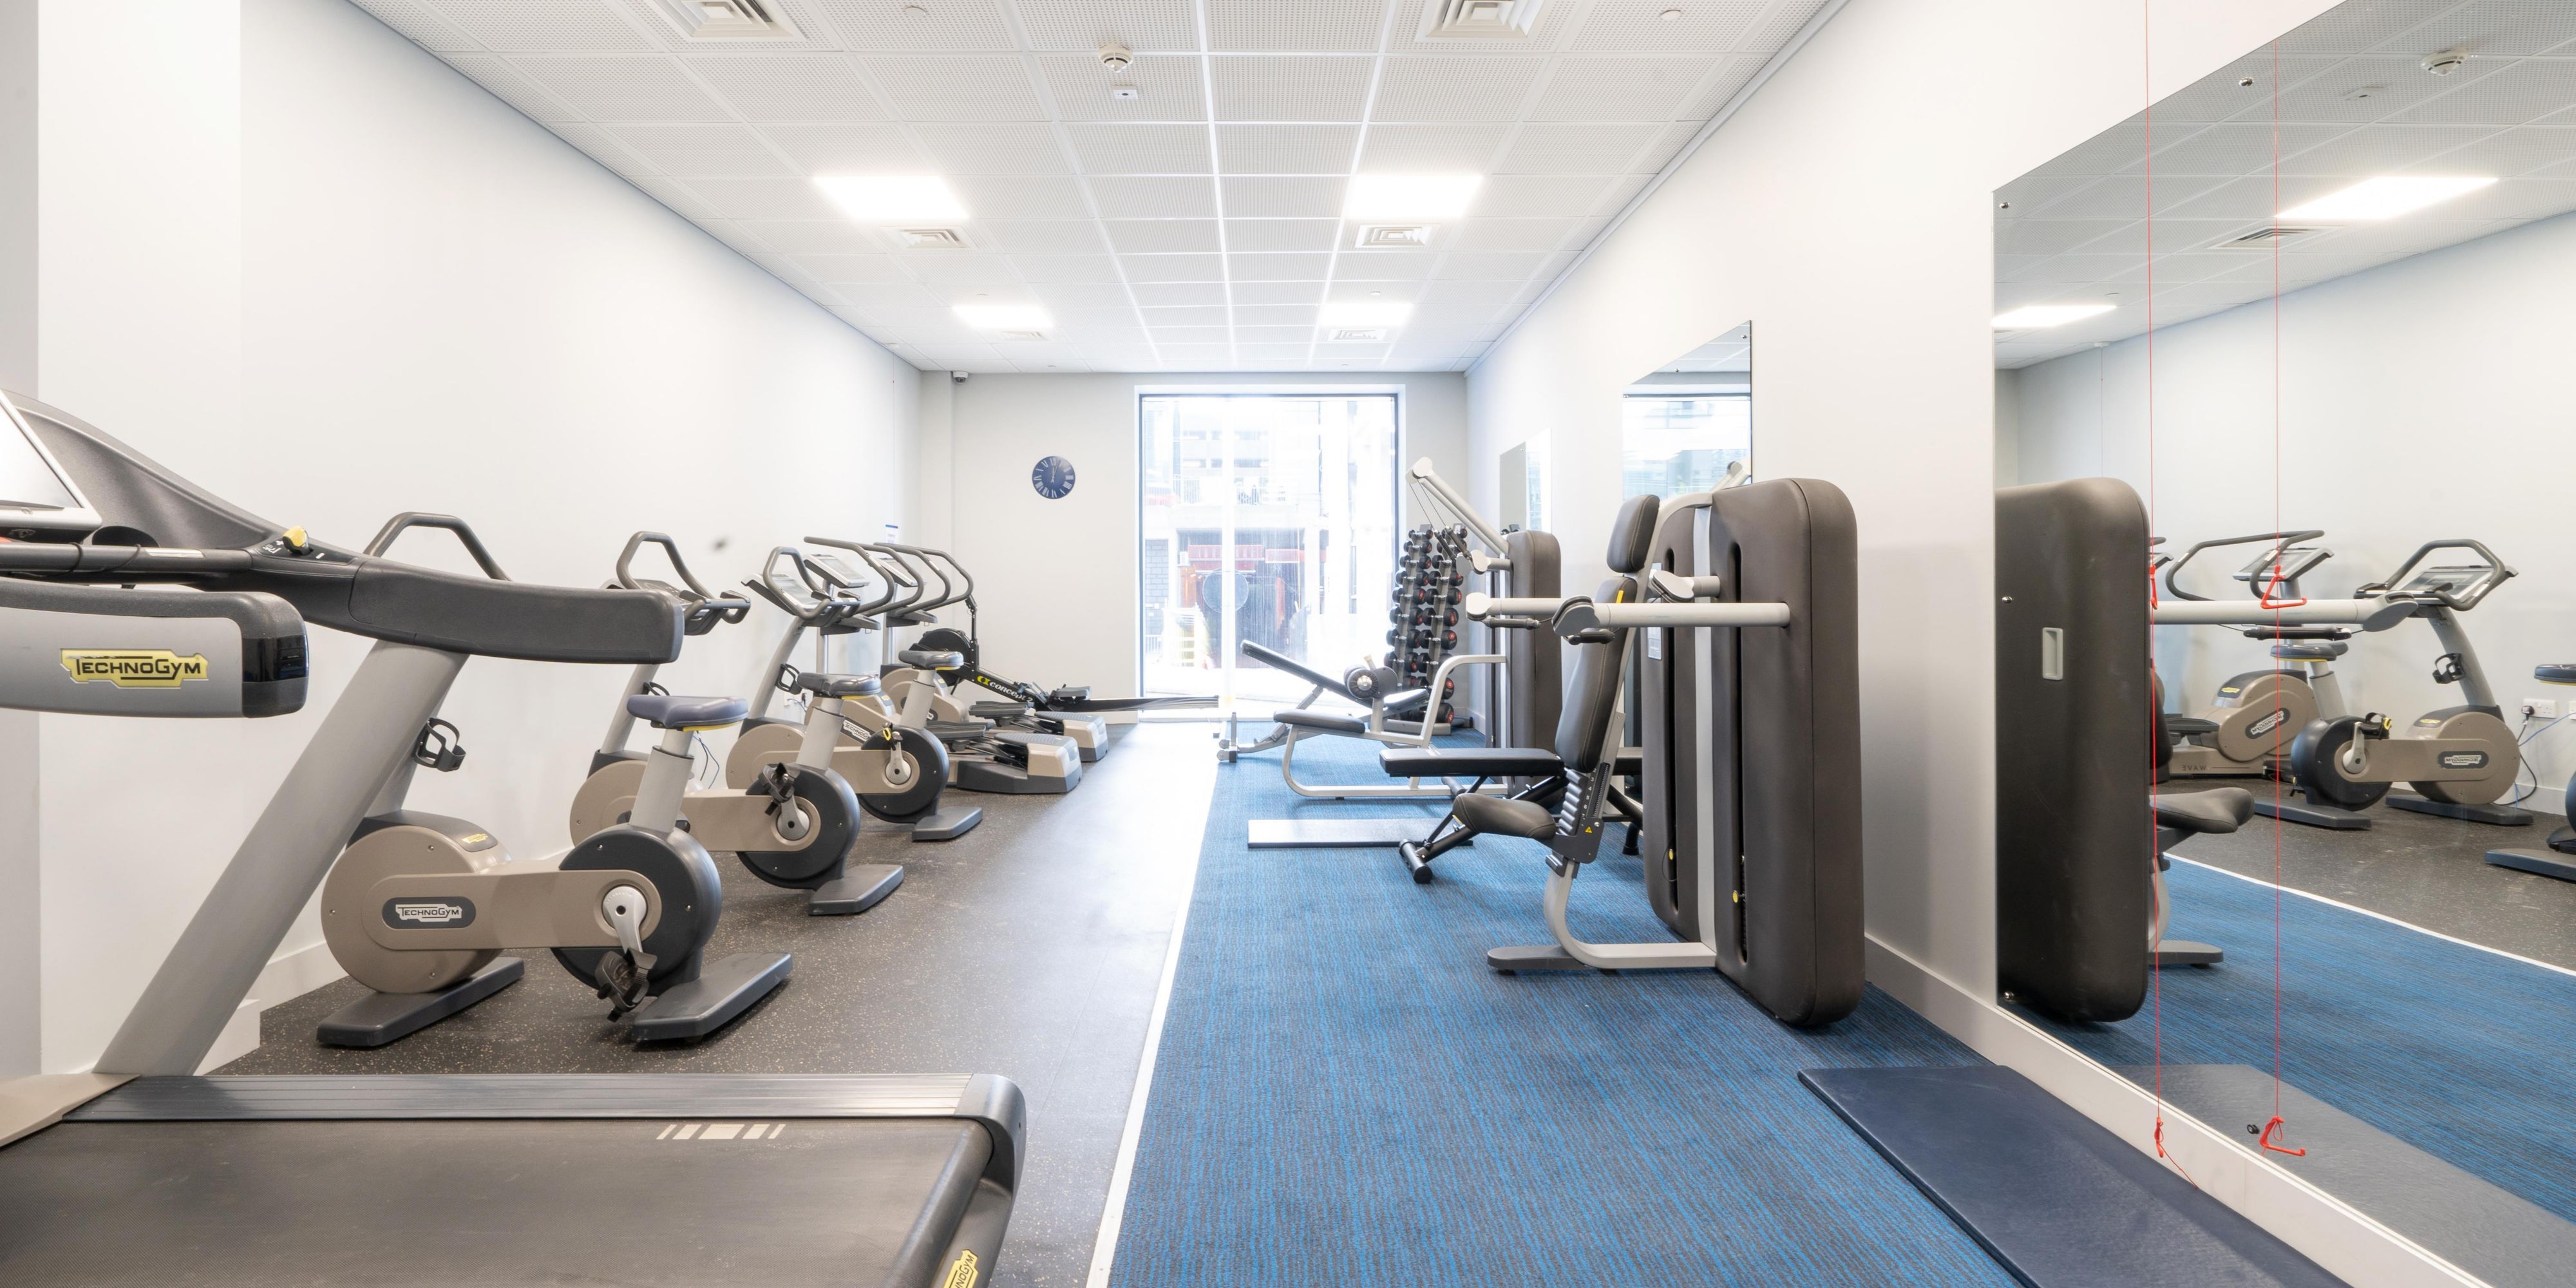 Get your sweat on in the on-site gym, free for guests. Treadmill sprints? A leisurely cycle? Or an intense dumbbell workout? Take your pick!